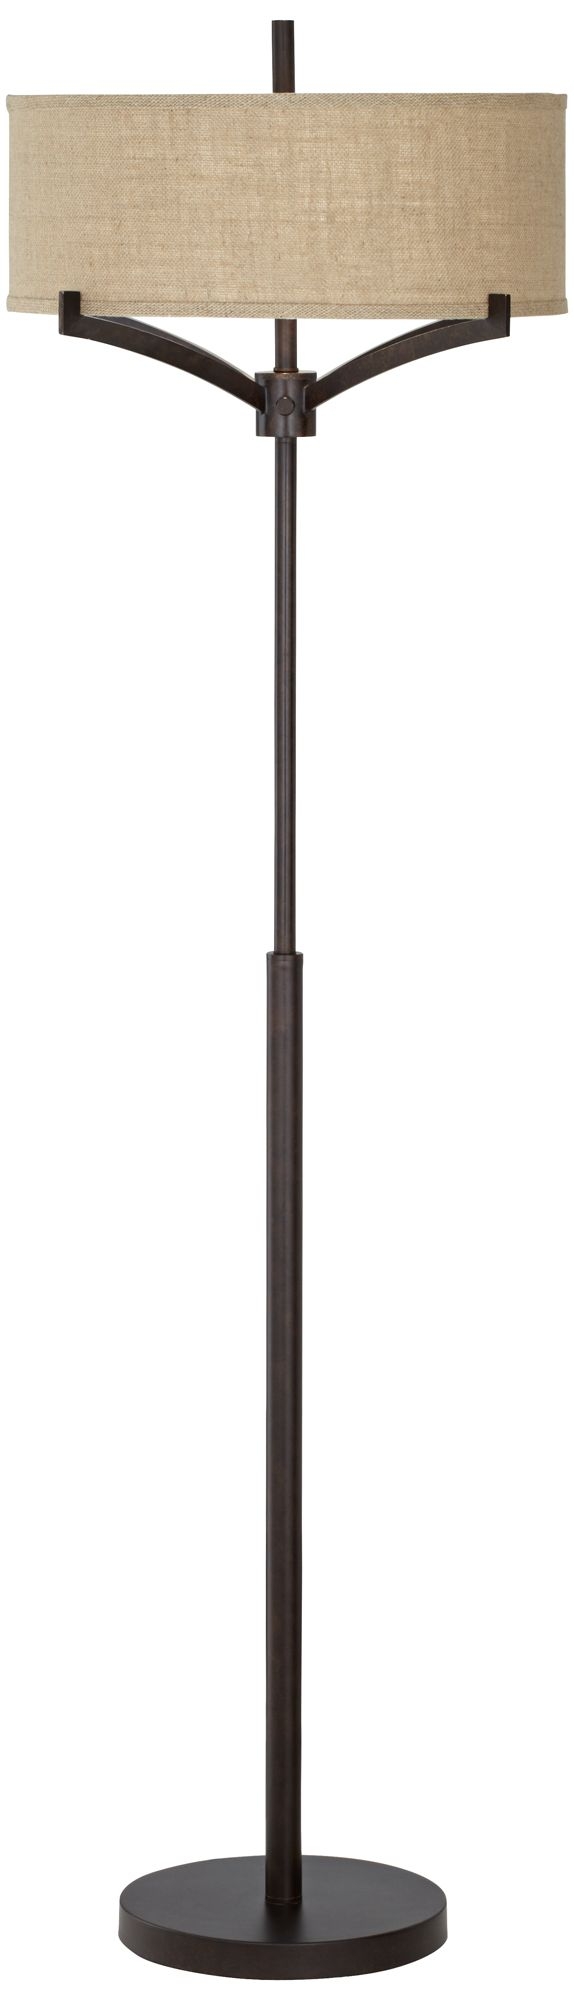 Franklin Iron Worksâ„¢ Tremont Floor Lamp with Burlap Shade - Image 0